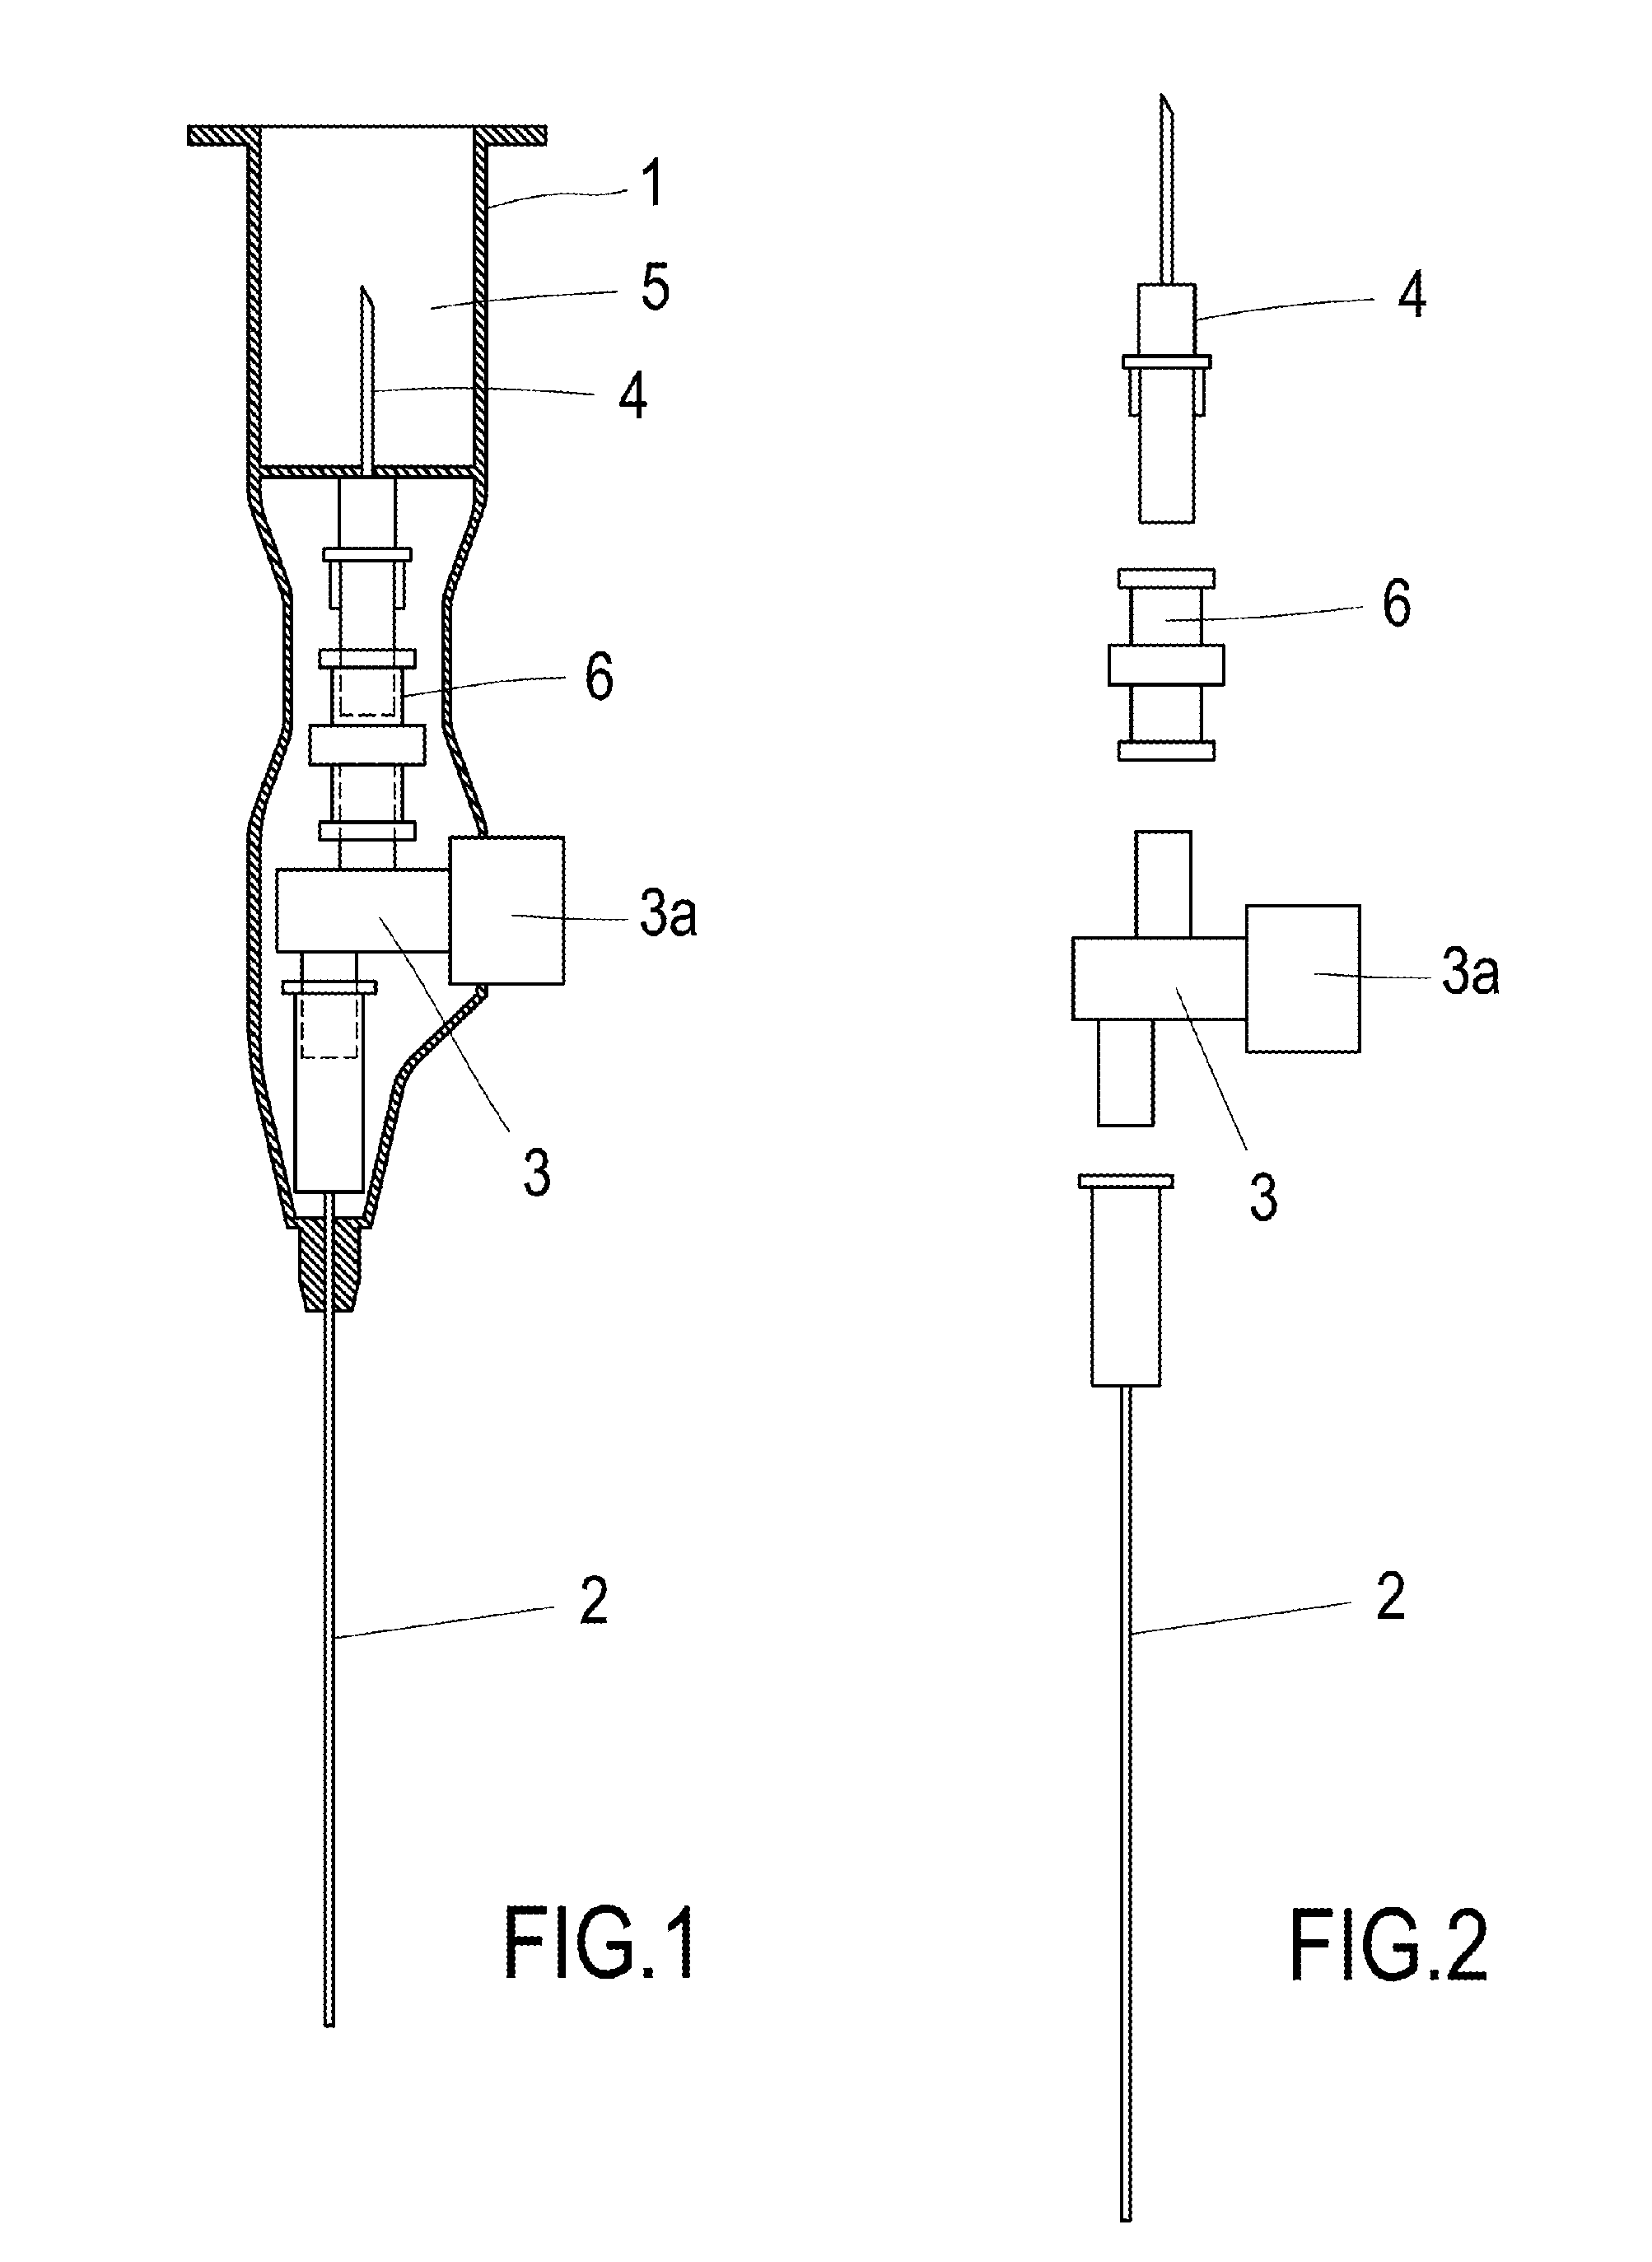 Method for the preparation of at least one compound from blood, and extraction device for use in the execution of said method